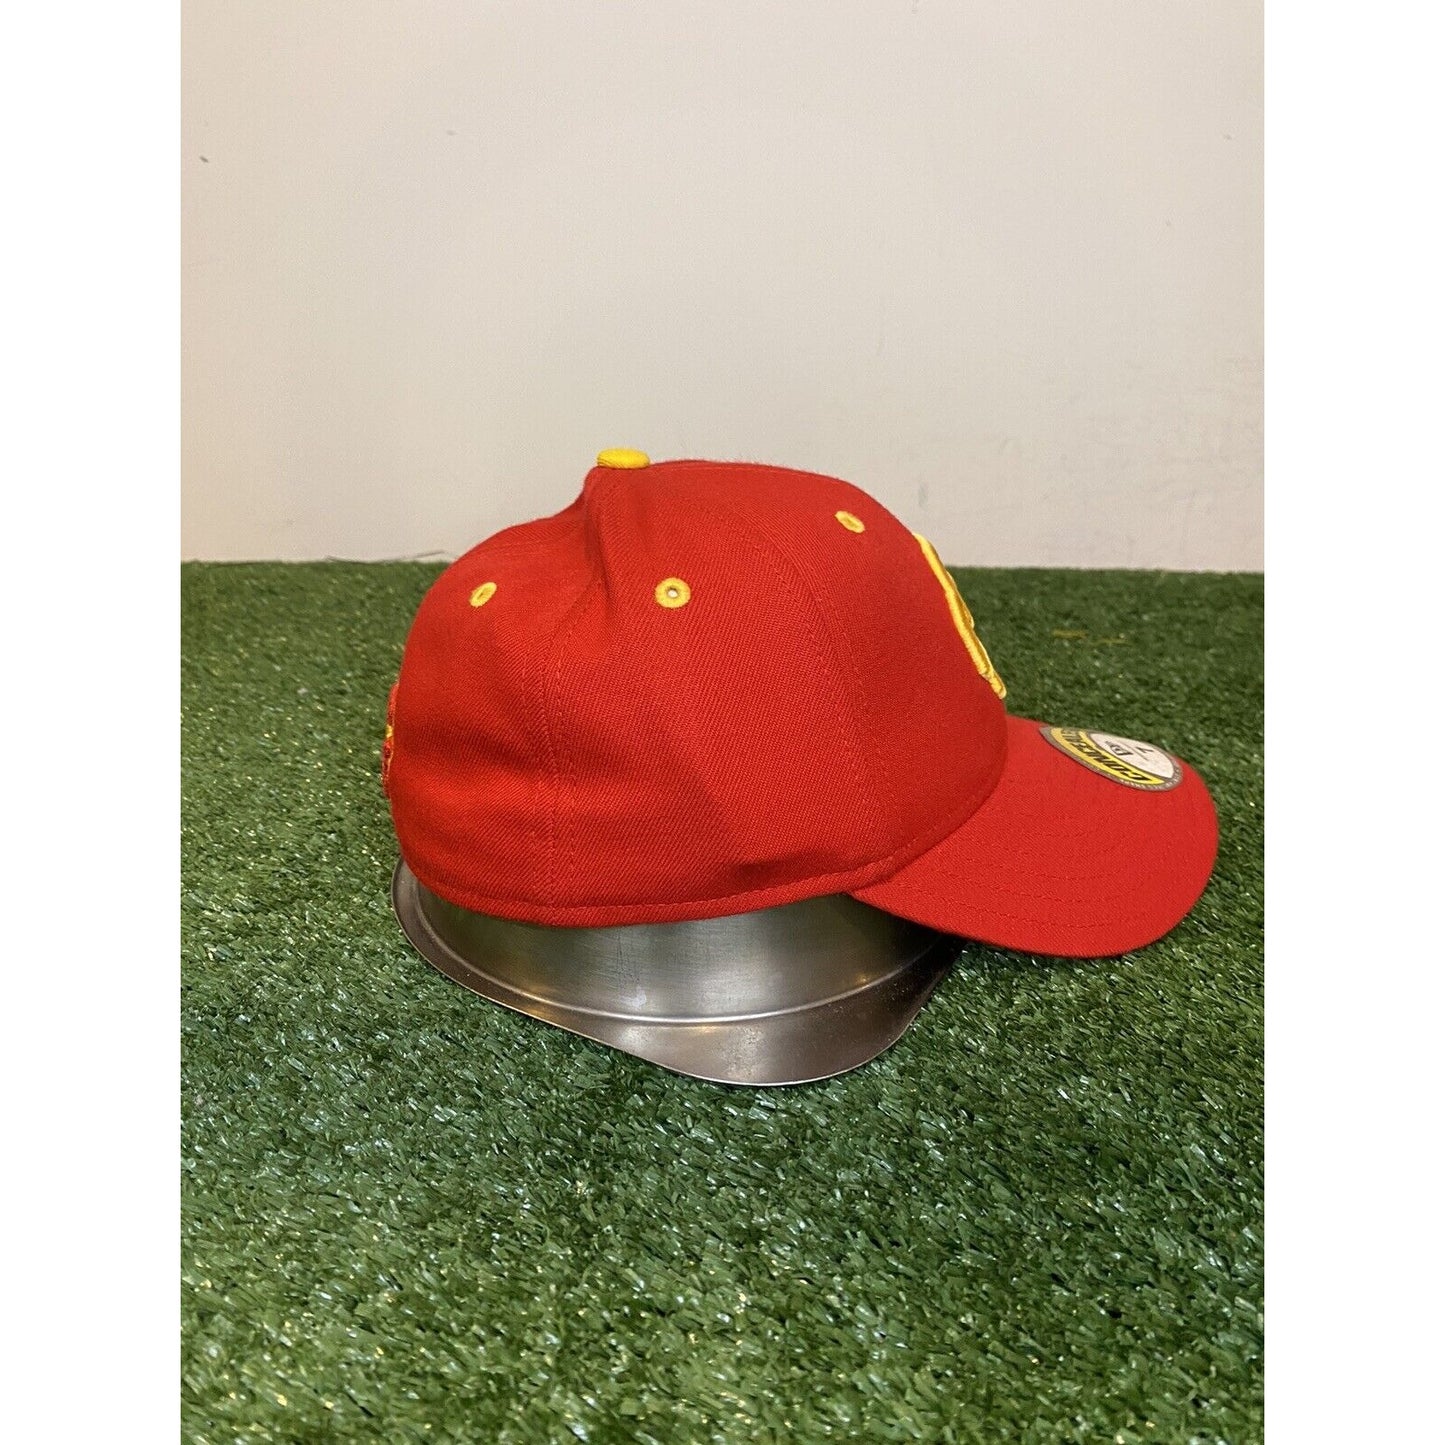 Retro New Era Cap Concealer USC Southern Cal Trojans fitted hat size 7 NWT